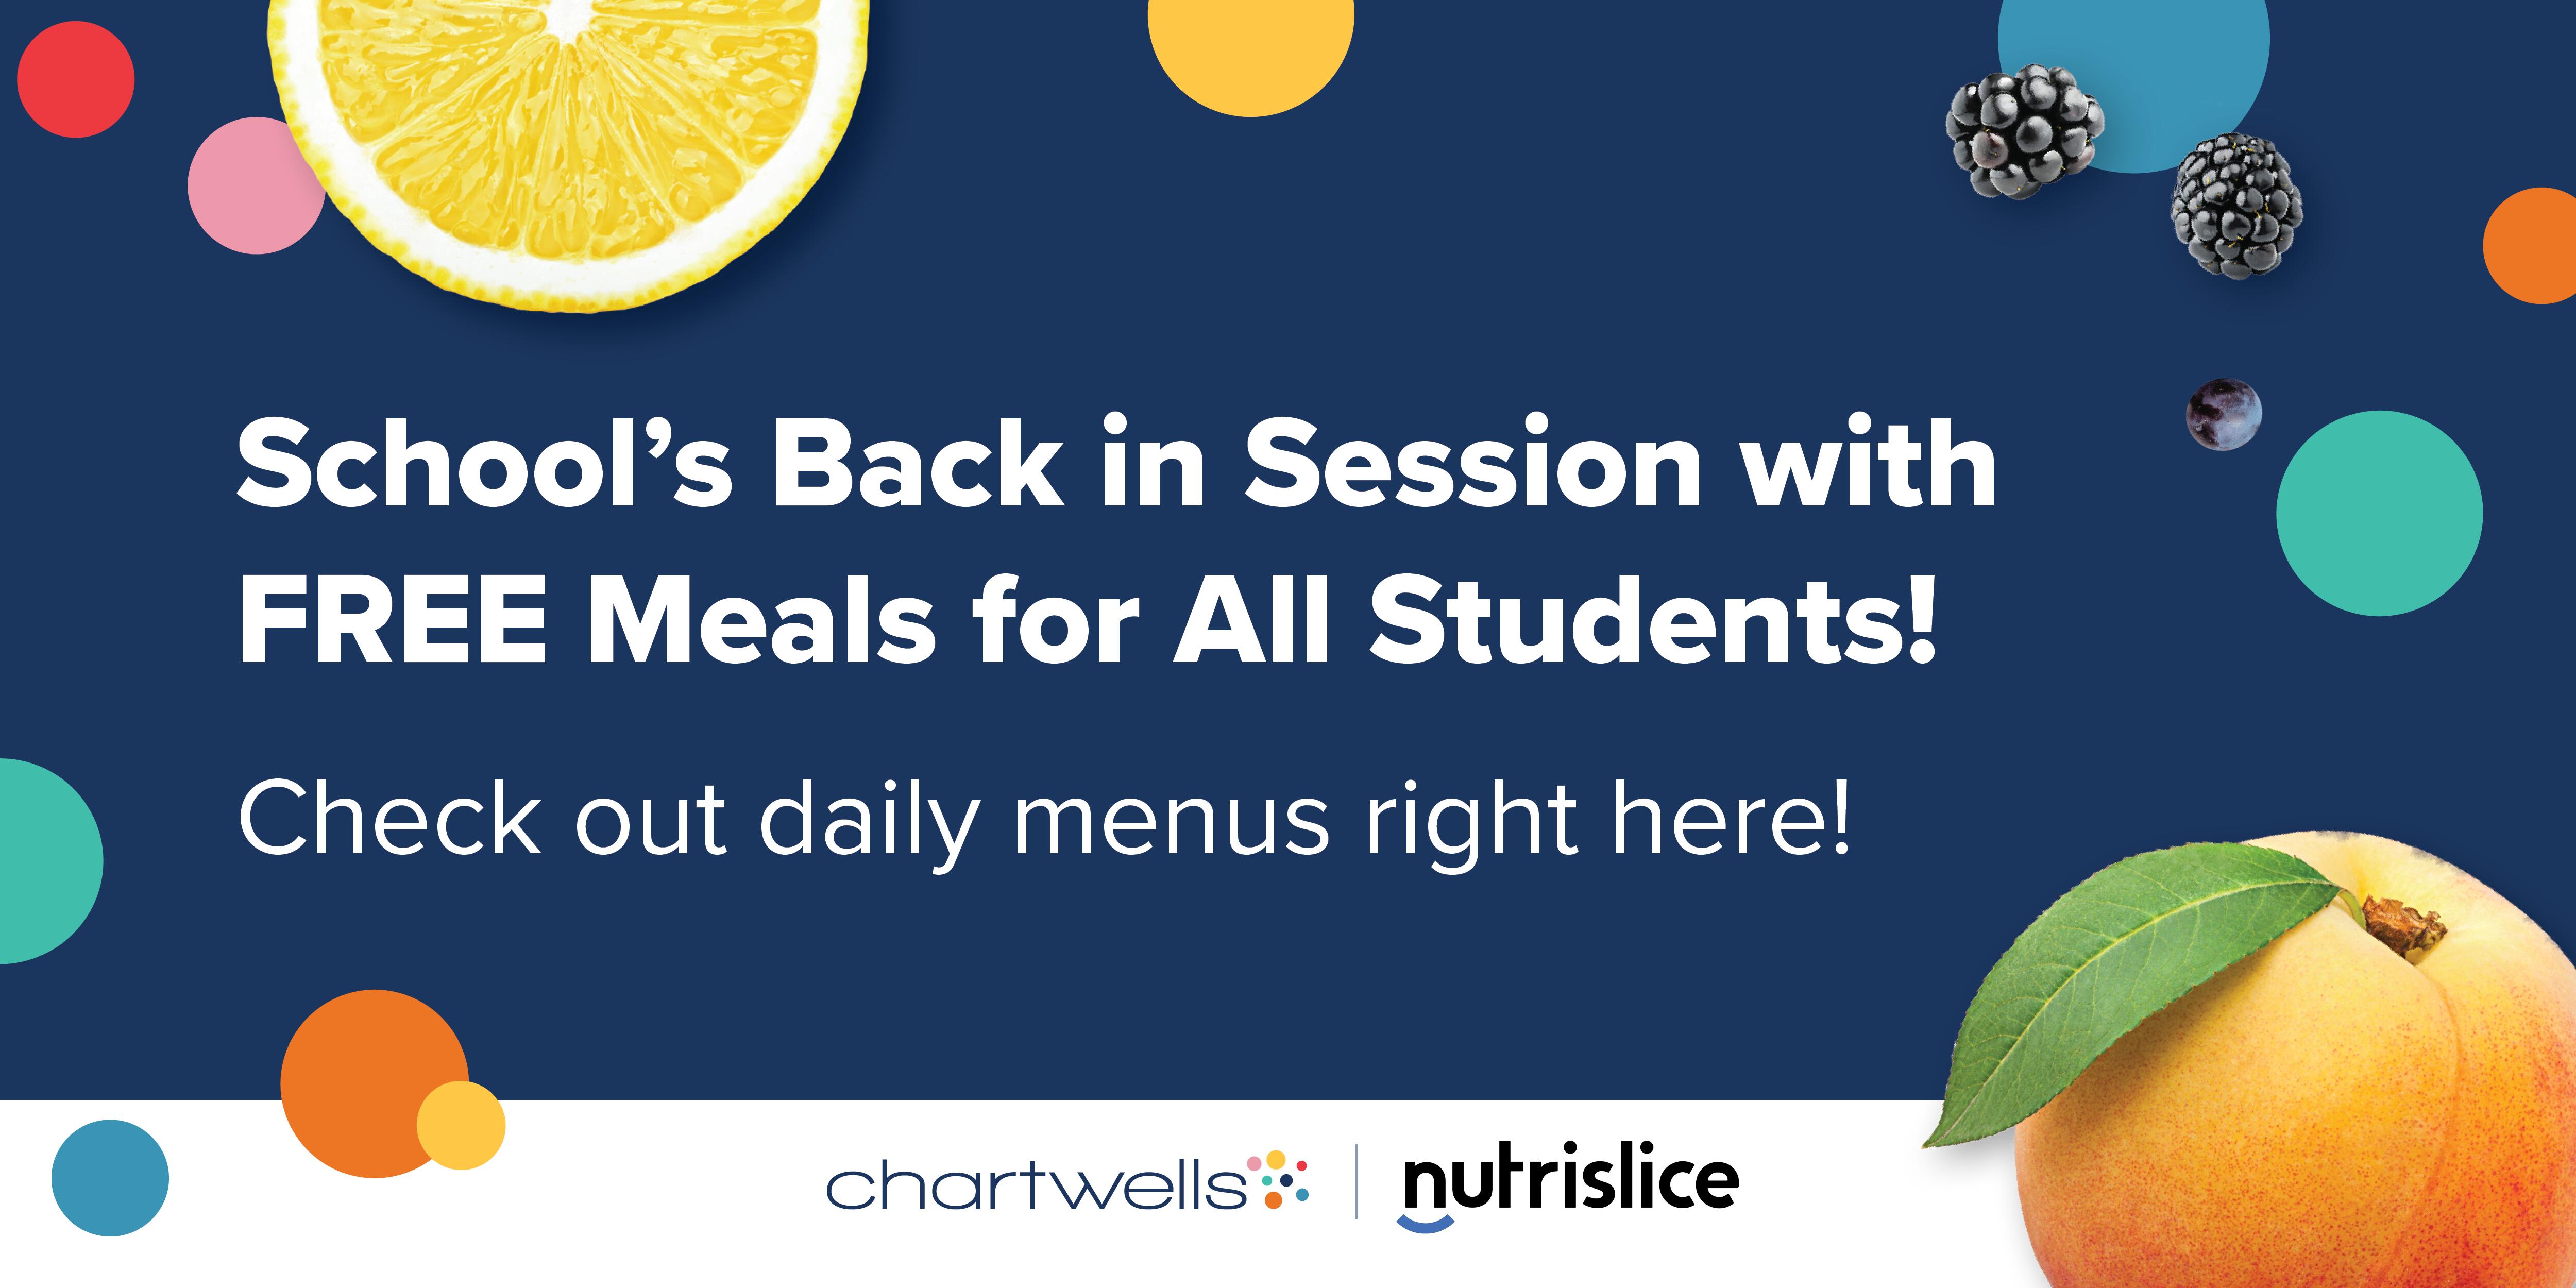 Free meals for all students banner